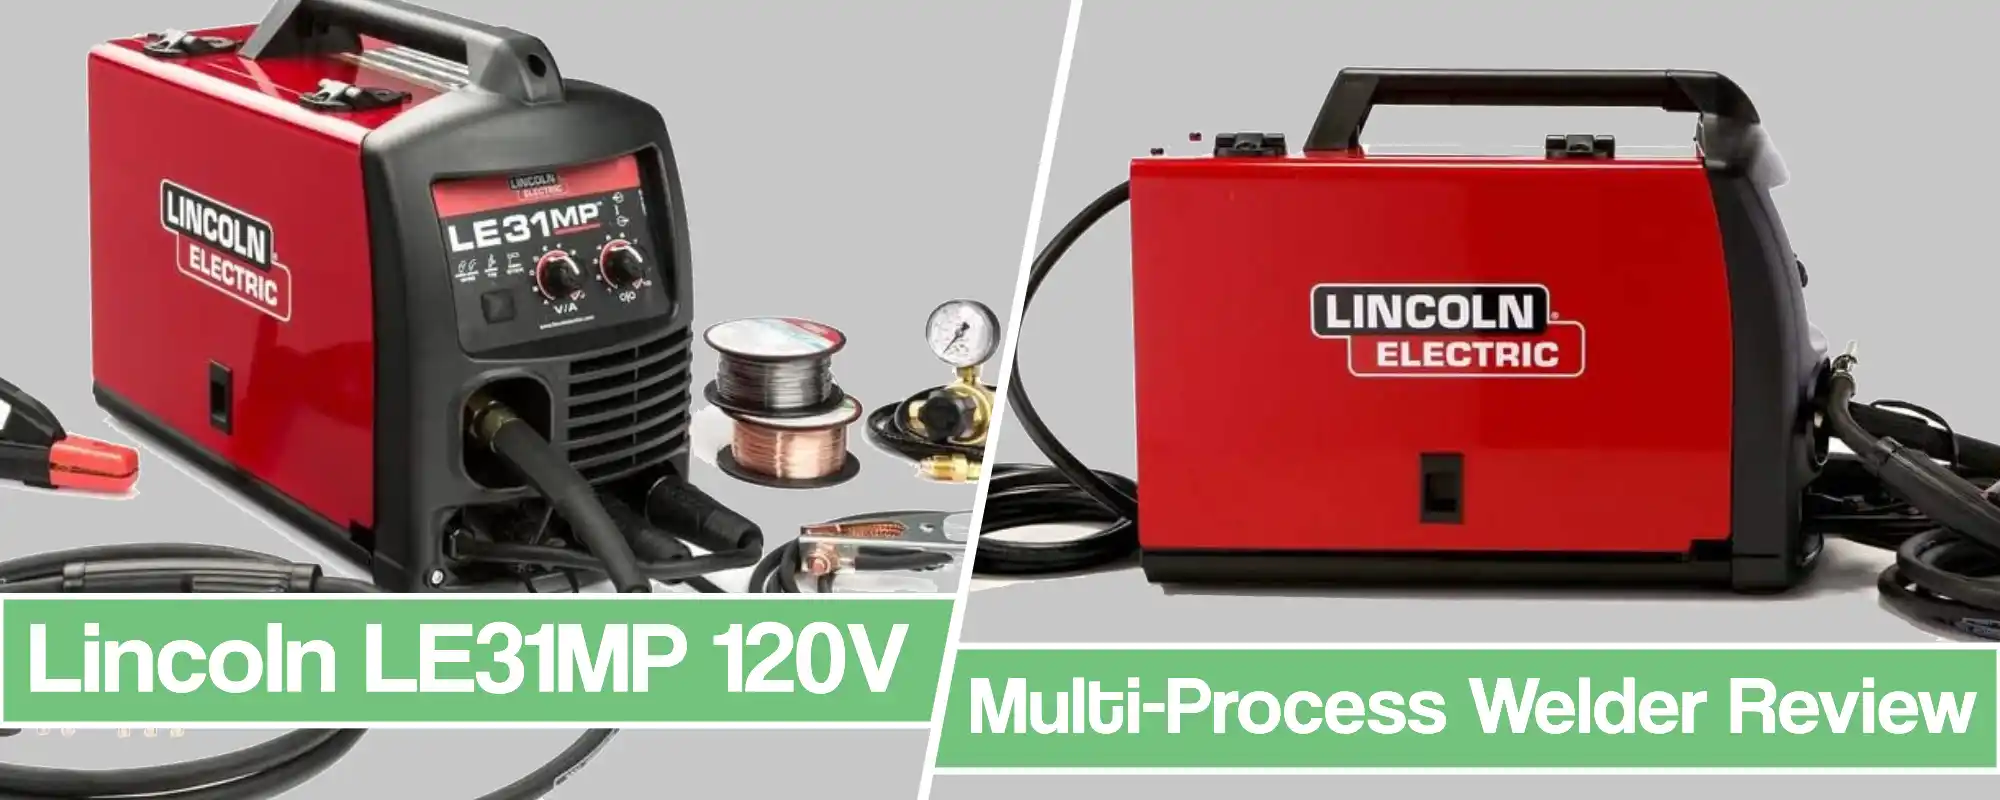 Featured image for the Lincoln LE31MP Multi-Process Welder Review article